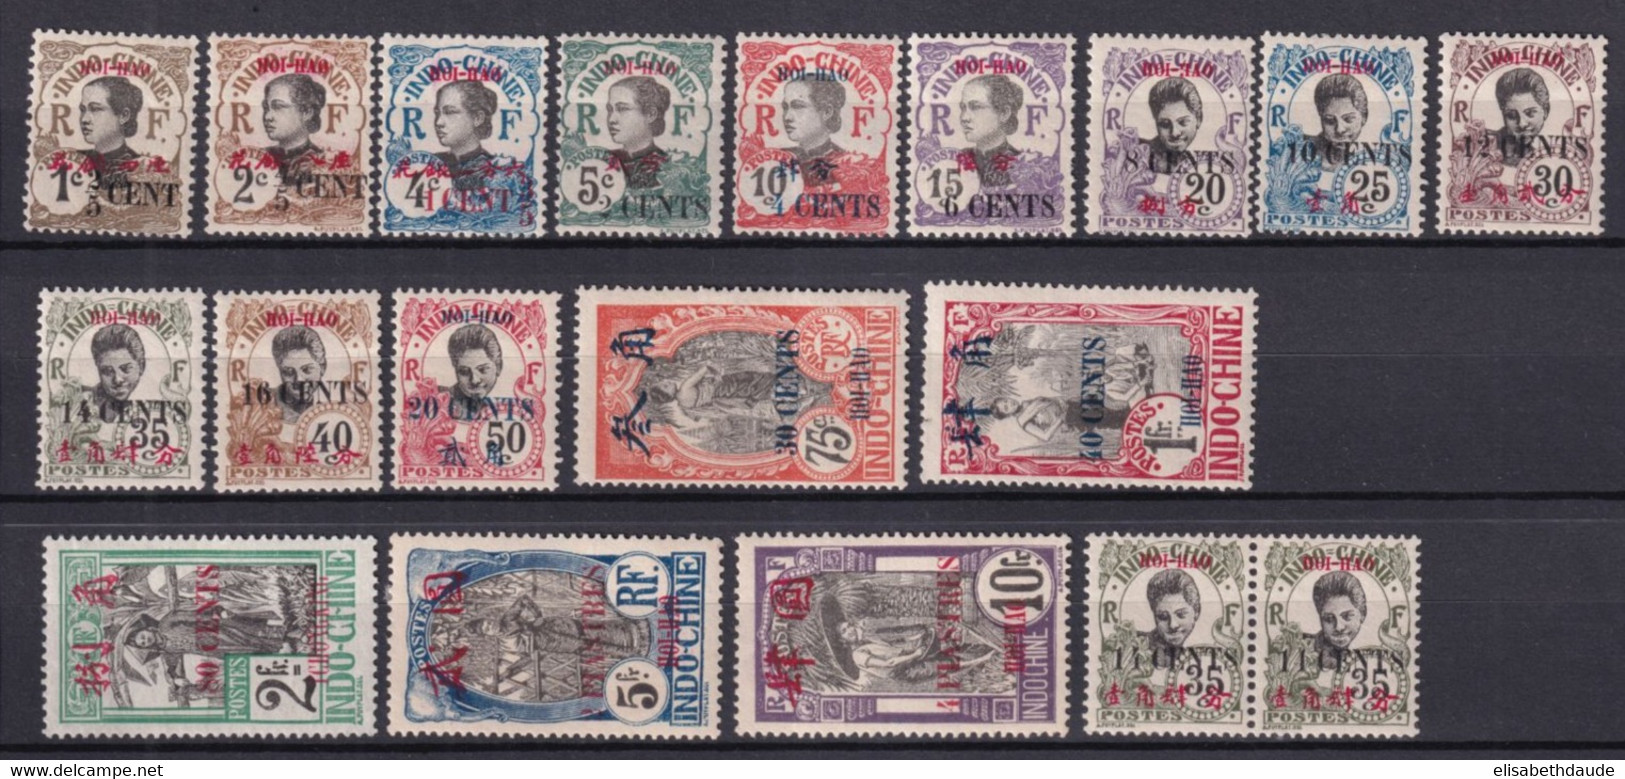 HOI-HAO (CHINE) - SERIE COMPLETE YVERT N°66/82 + PAIRE 75aa * MLH - COTE YVERT = 503 EUR - 10F SIGNE BRUN ! - Unused Stamps